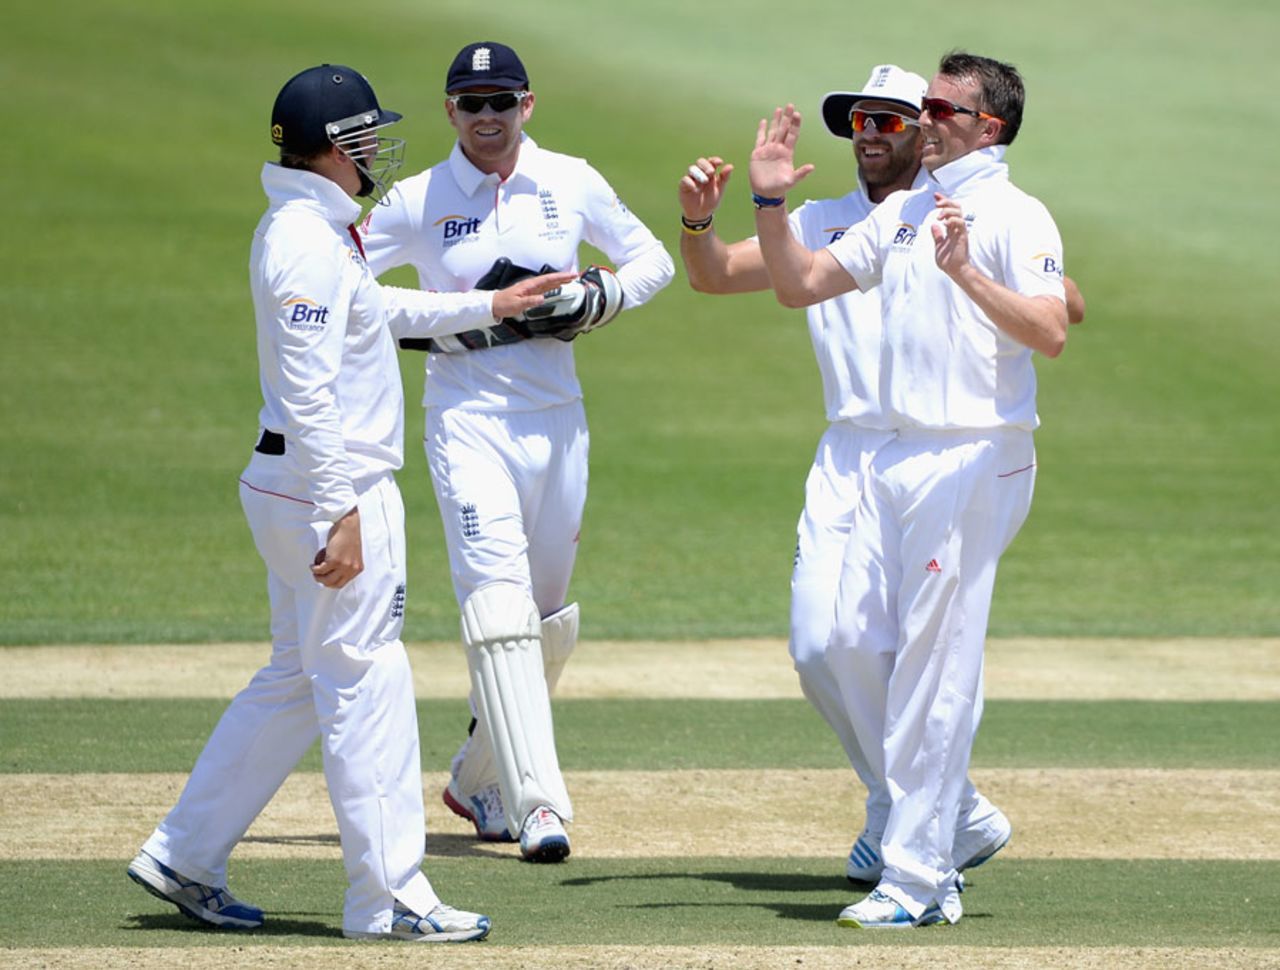 Graeme Swann picked up four wickets, CA Chairman's XI v England XI, Tour match, Alice Springs, 2nd day, November 30, 2013